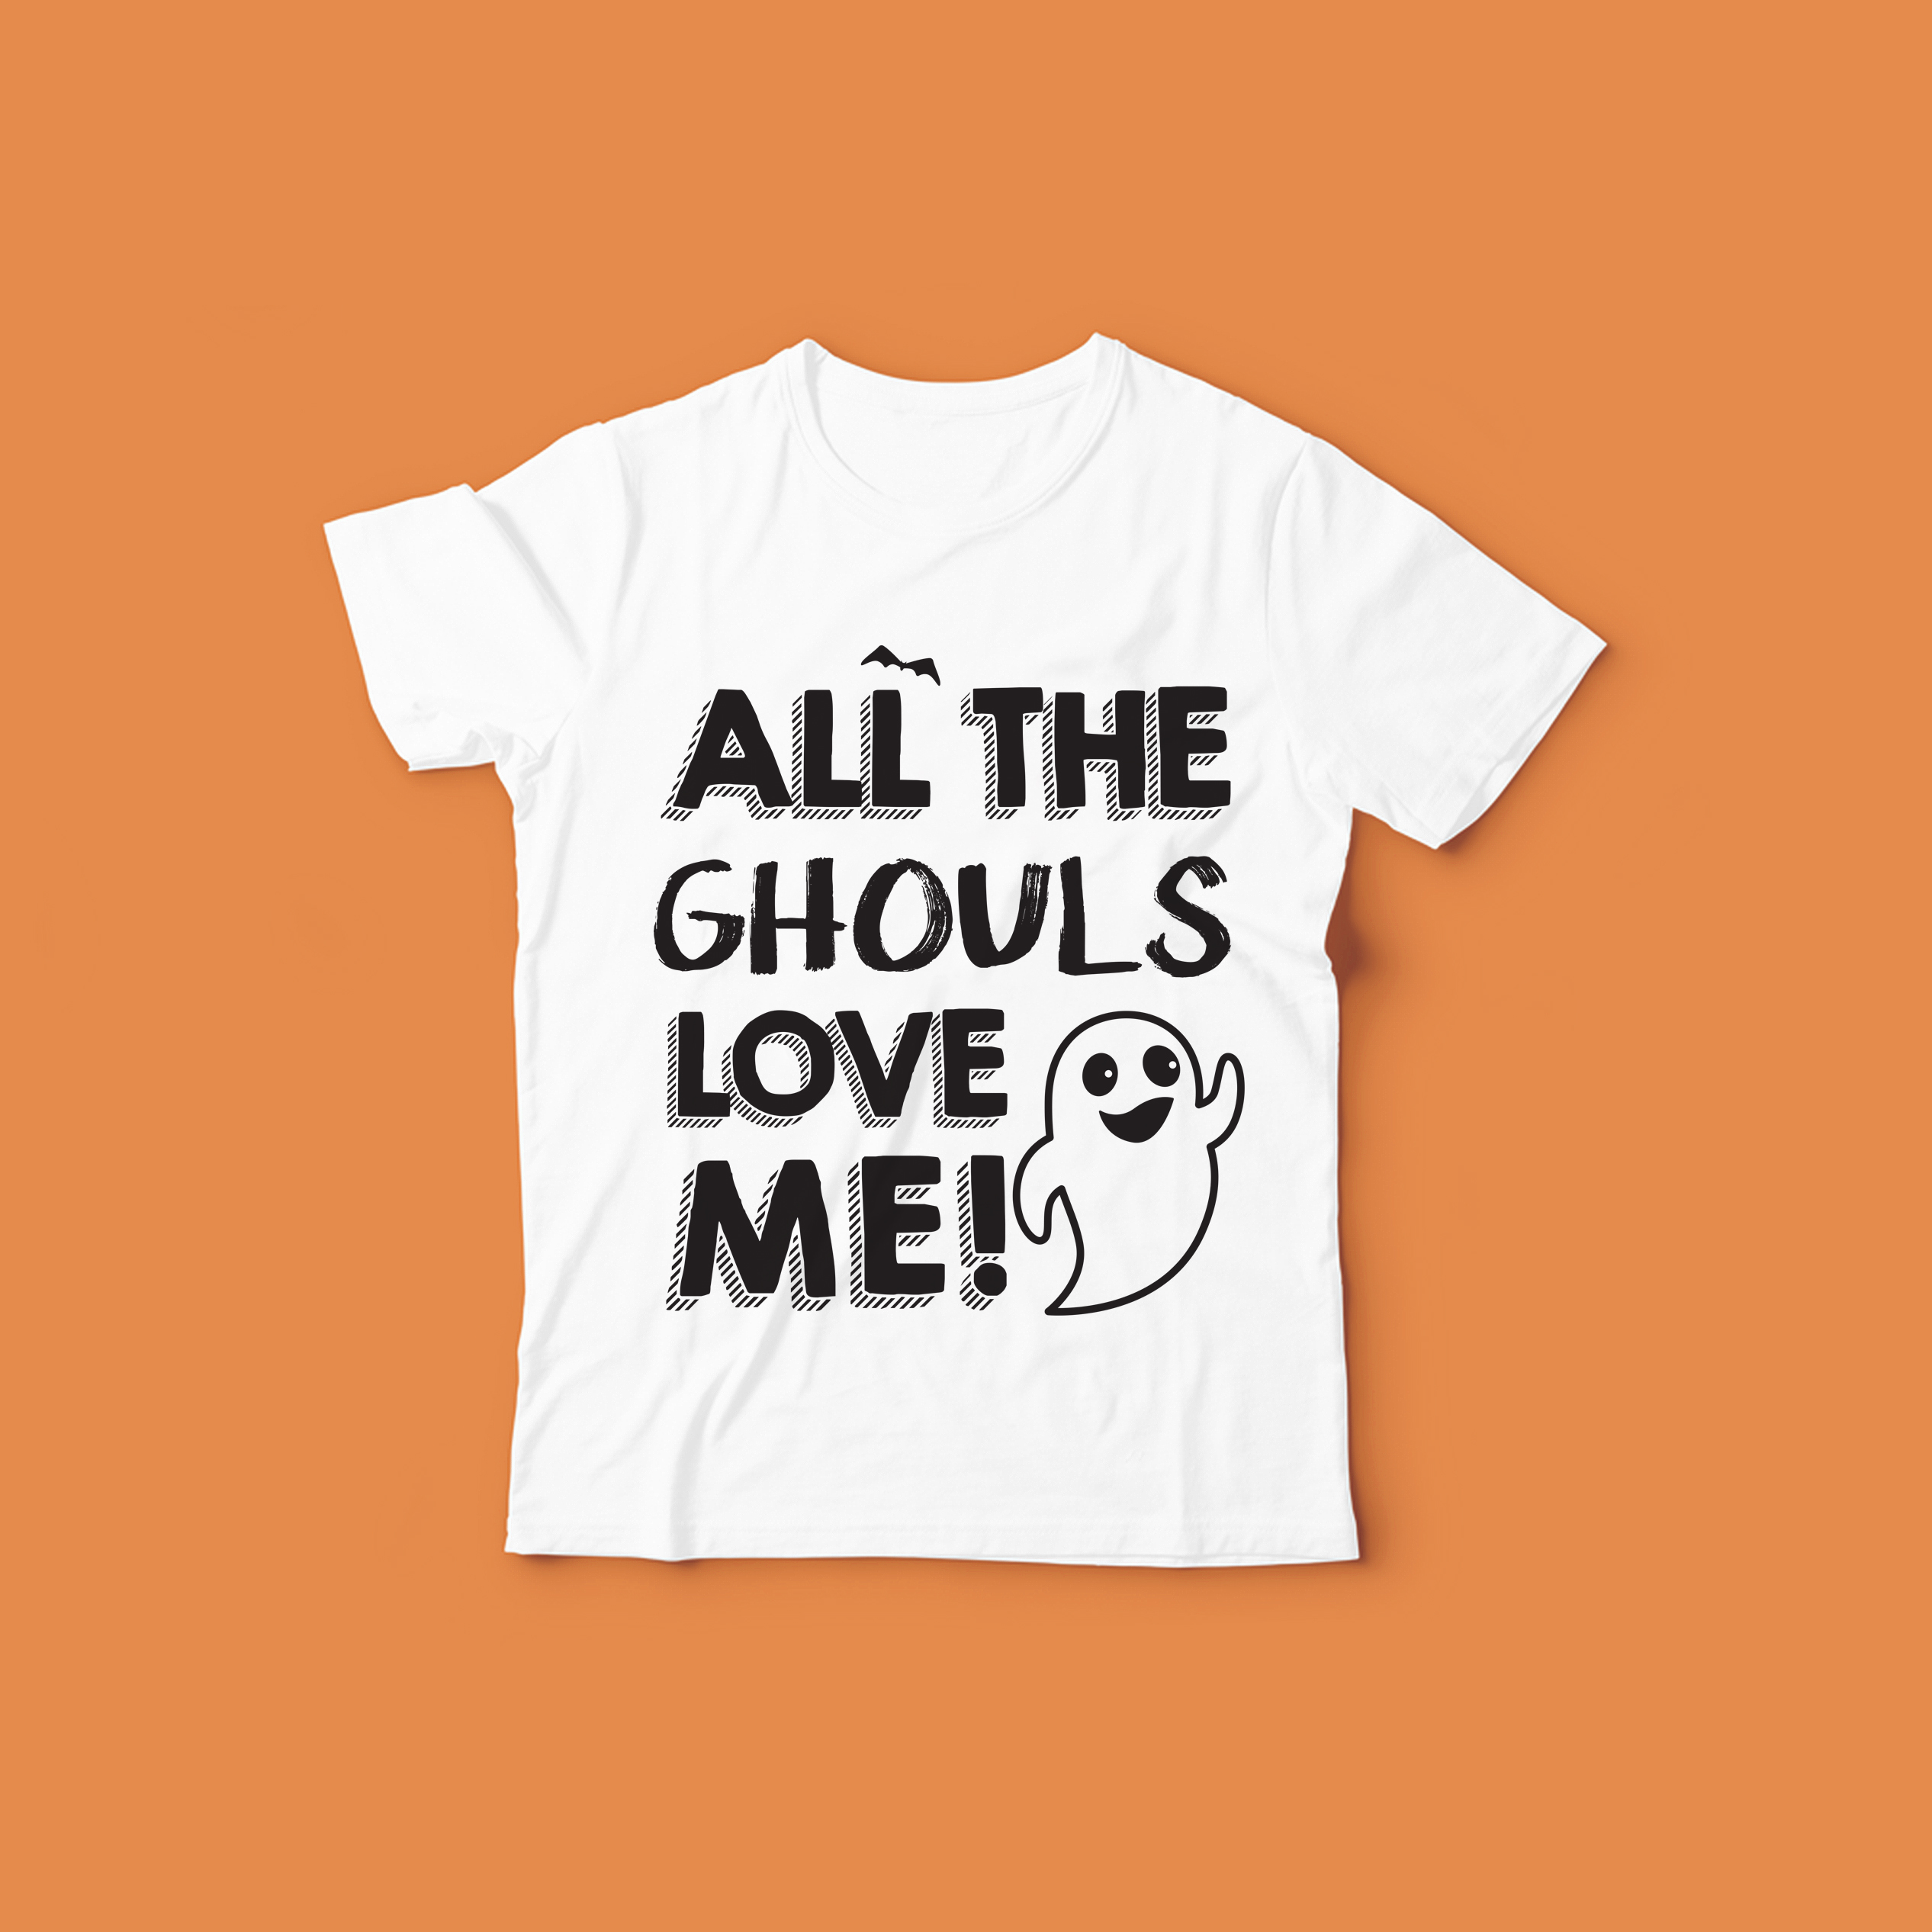 Awesome Halloween T-shirt transfers